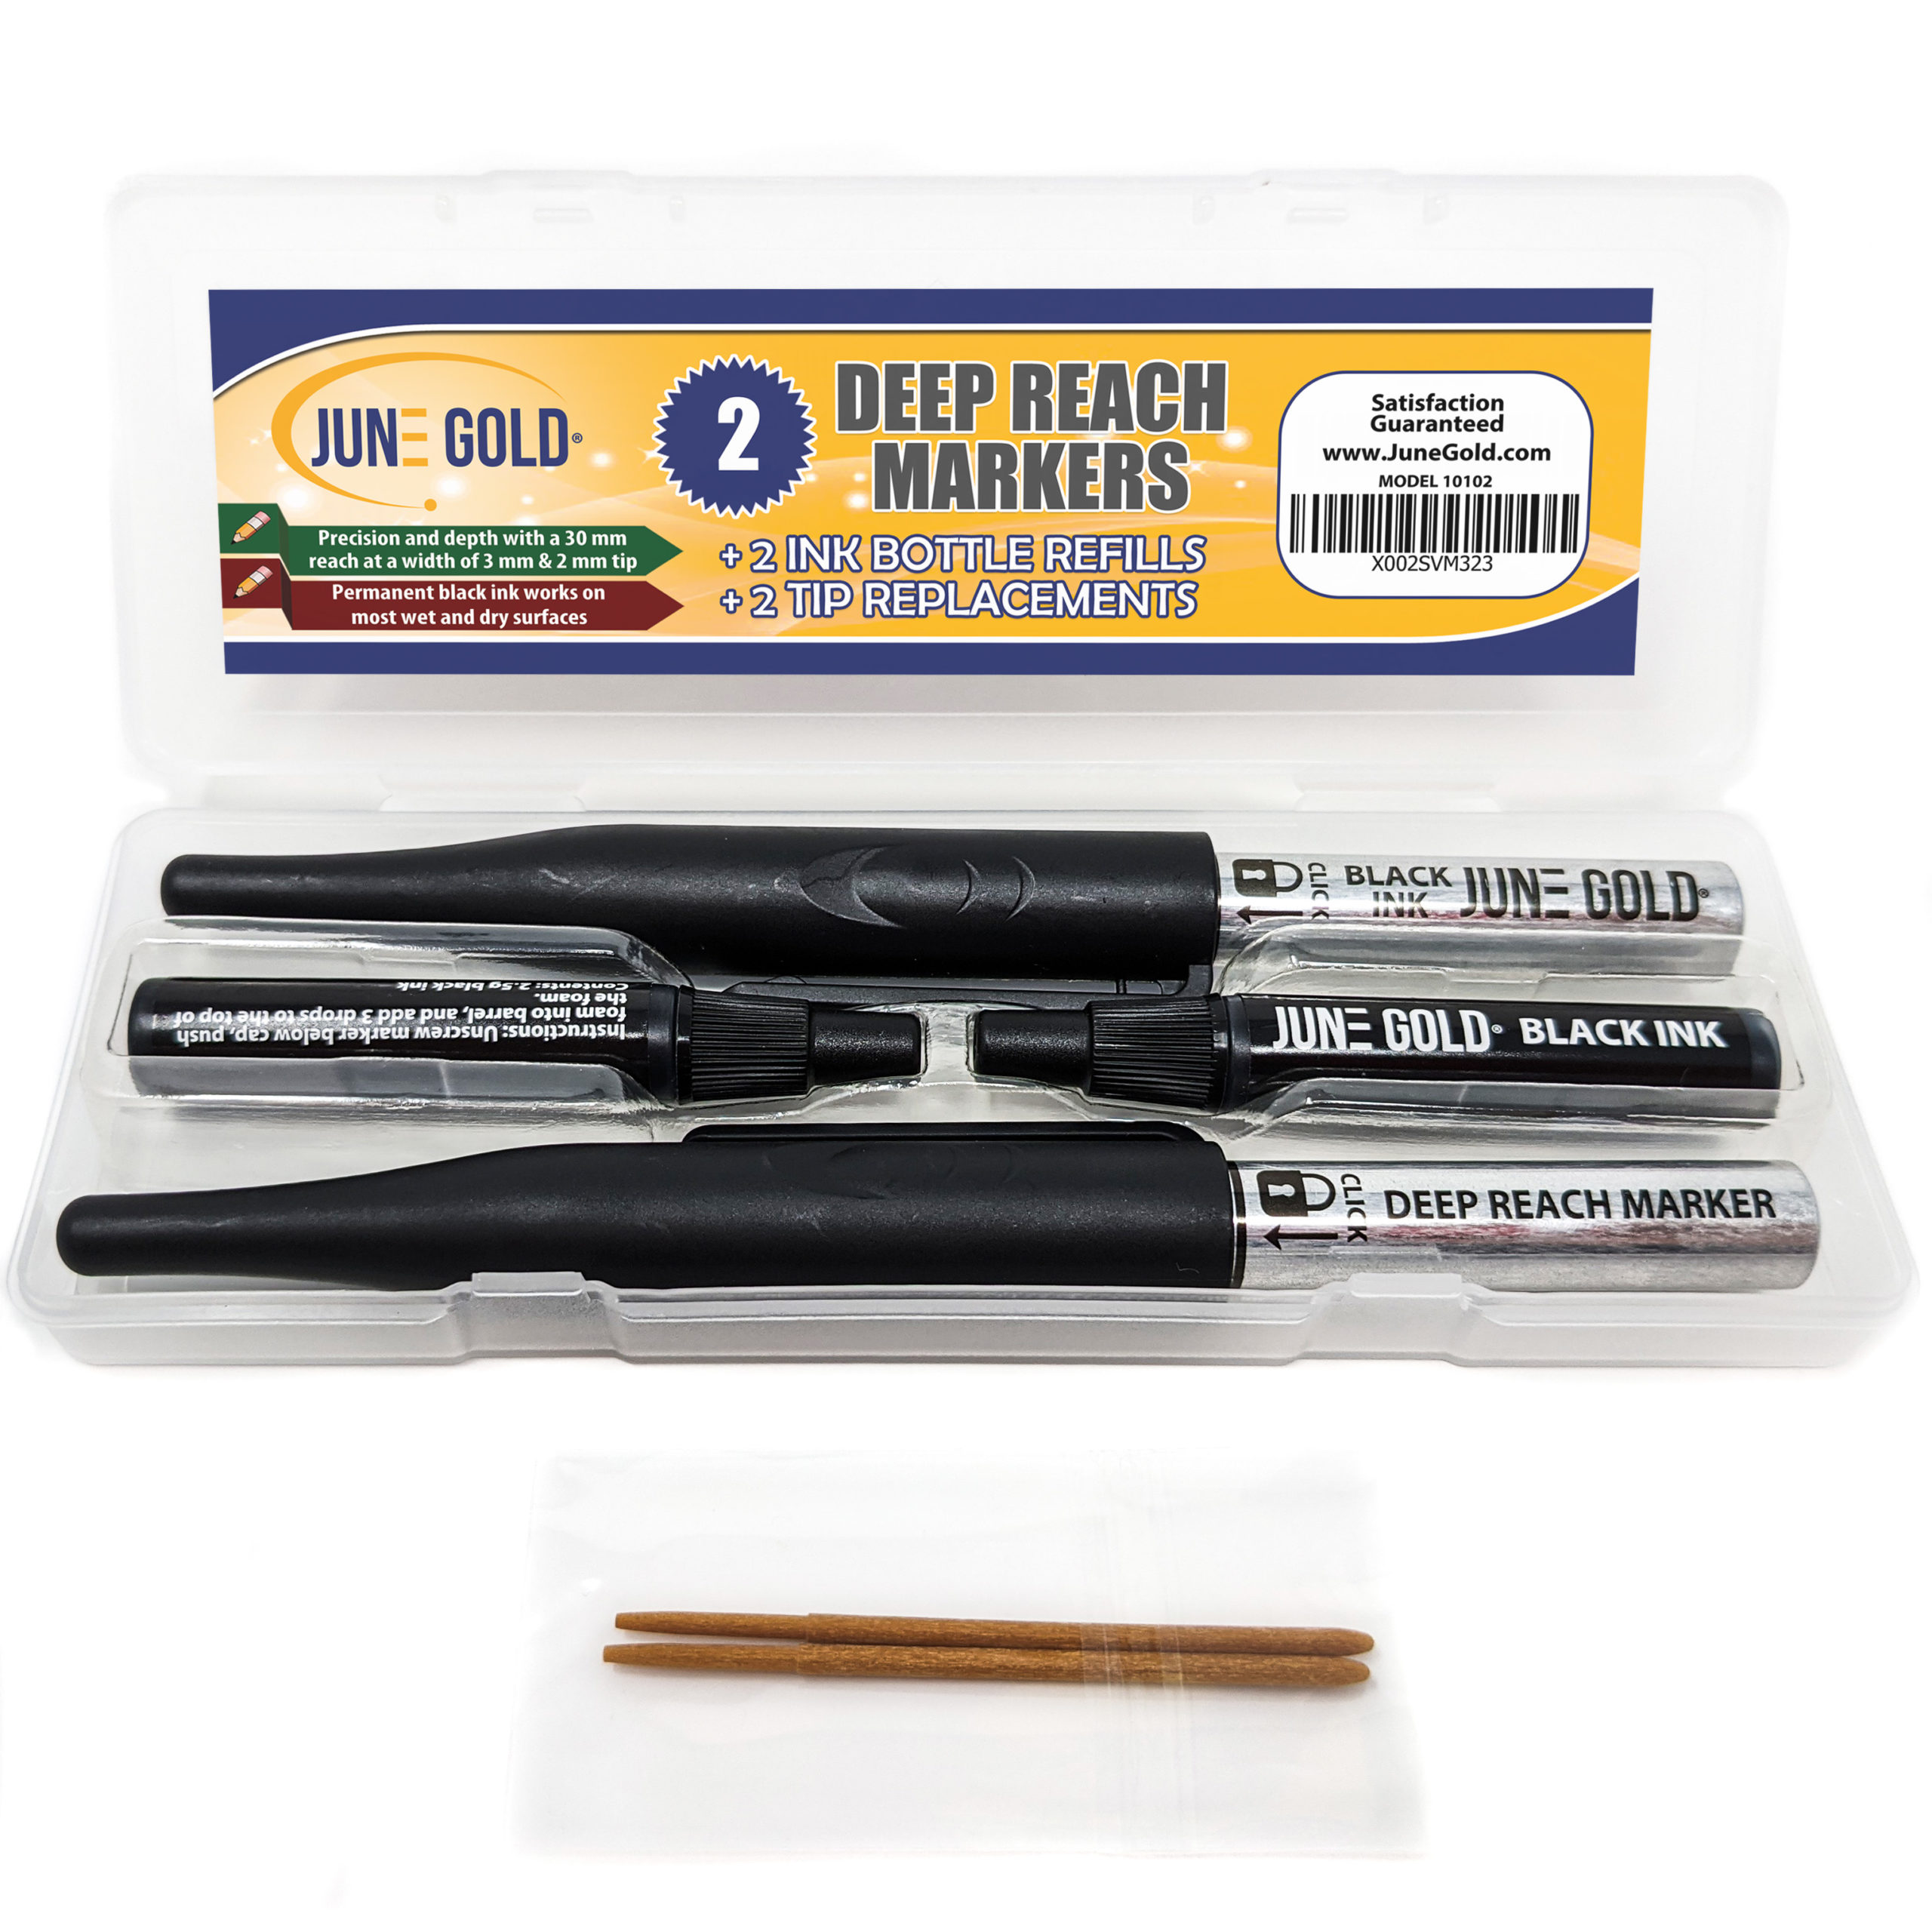 18Ct Dual Tip Markers With Black Barrel In Reusable Case With Handle